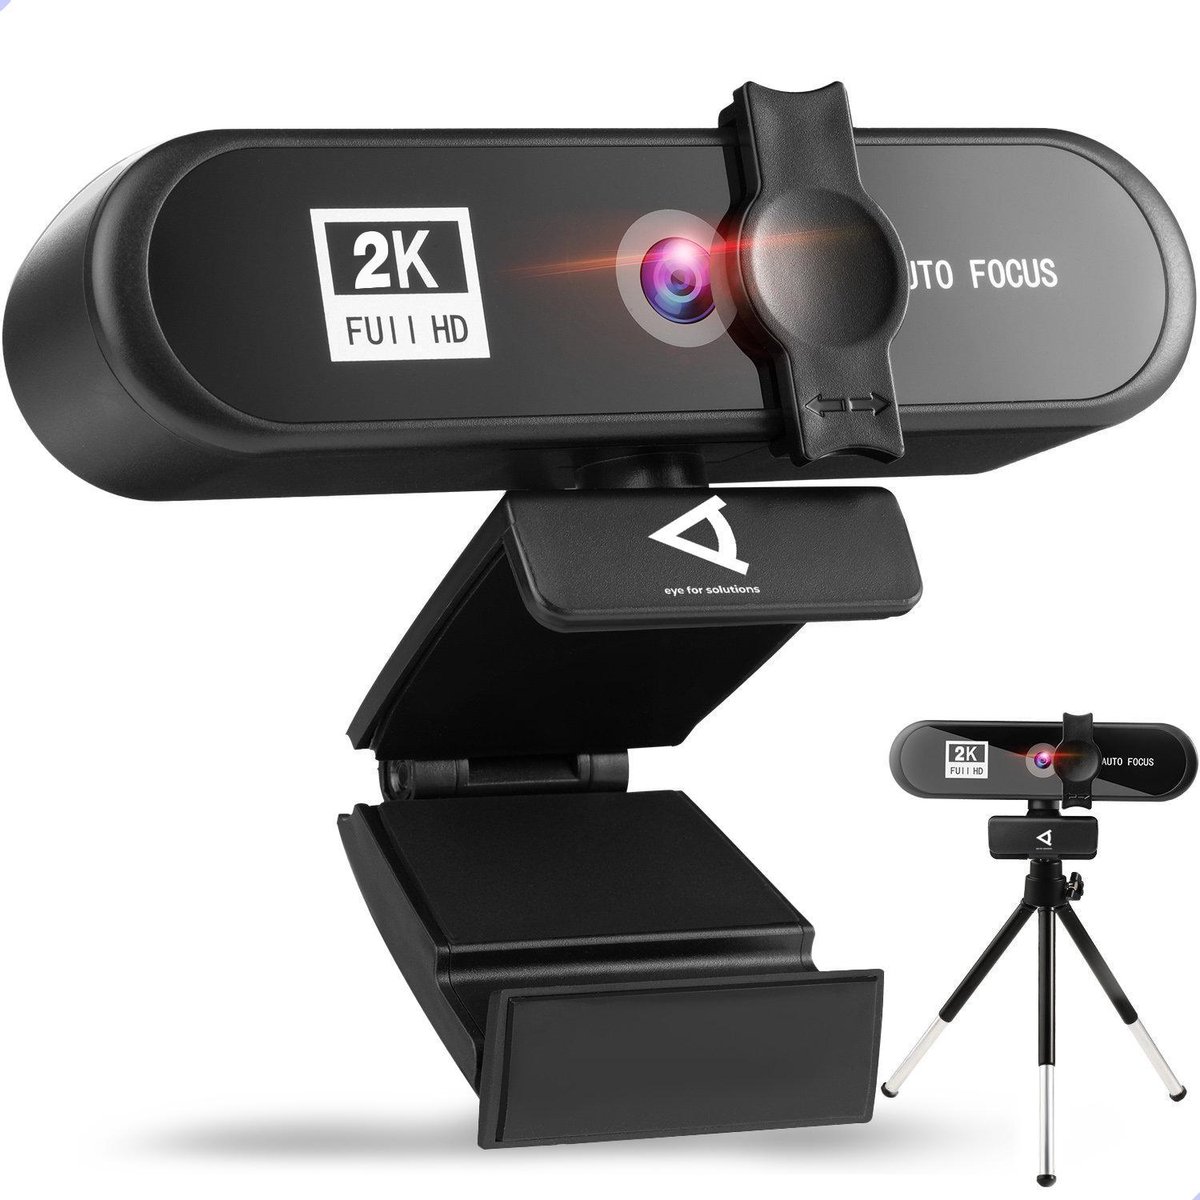 2K Webcam - Ingebouwde microfoon - Inclusief tripod - 1920x1080/30FPS - Inclusief privacy cover - Eye For Solutions